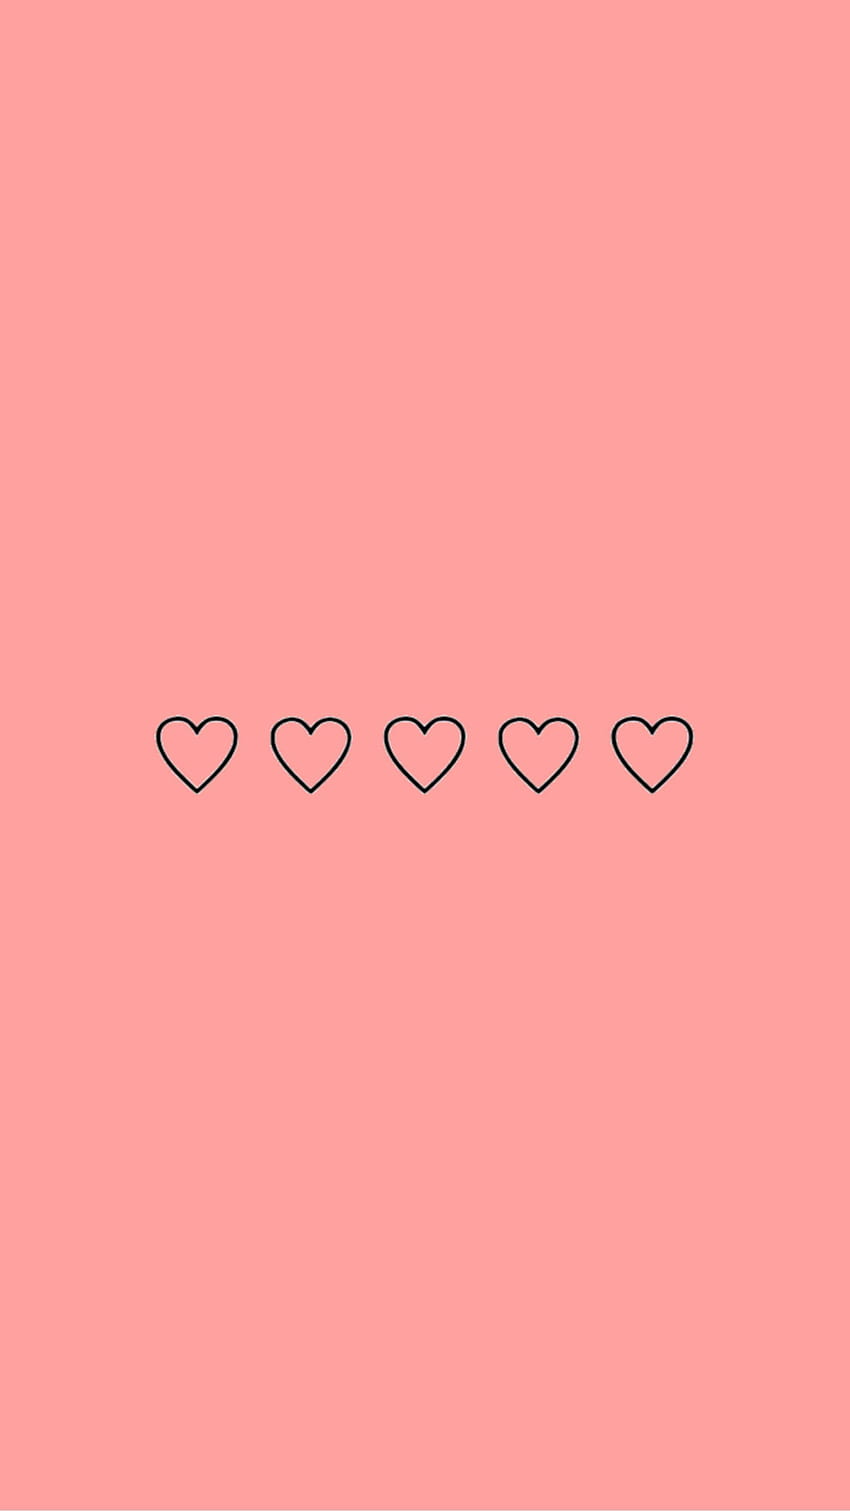 Pink background with black outline hearts in a row - Peach